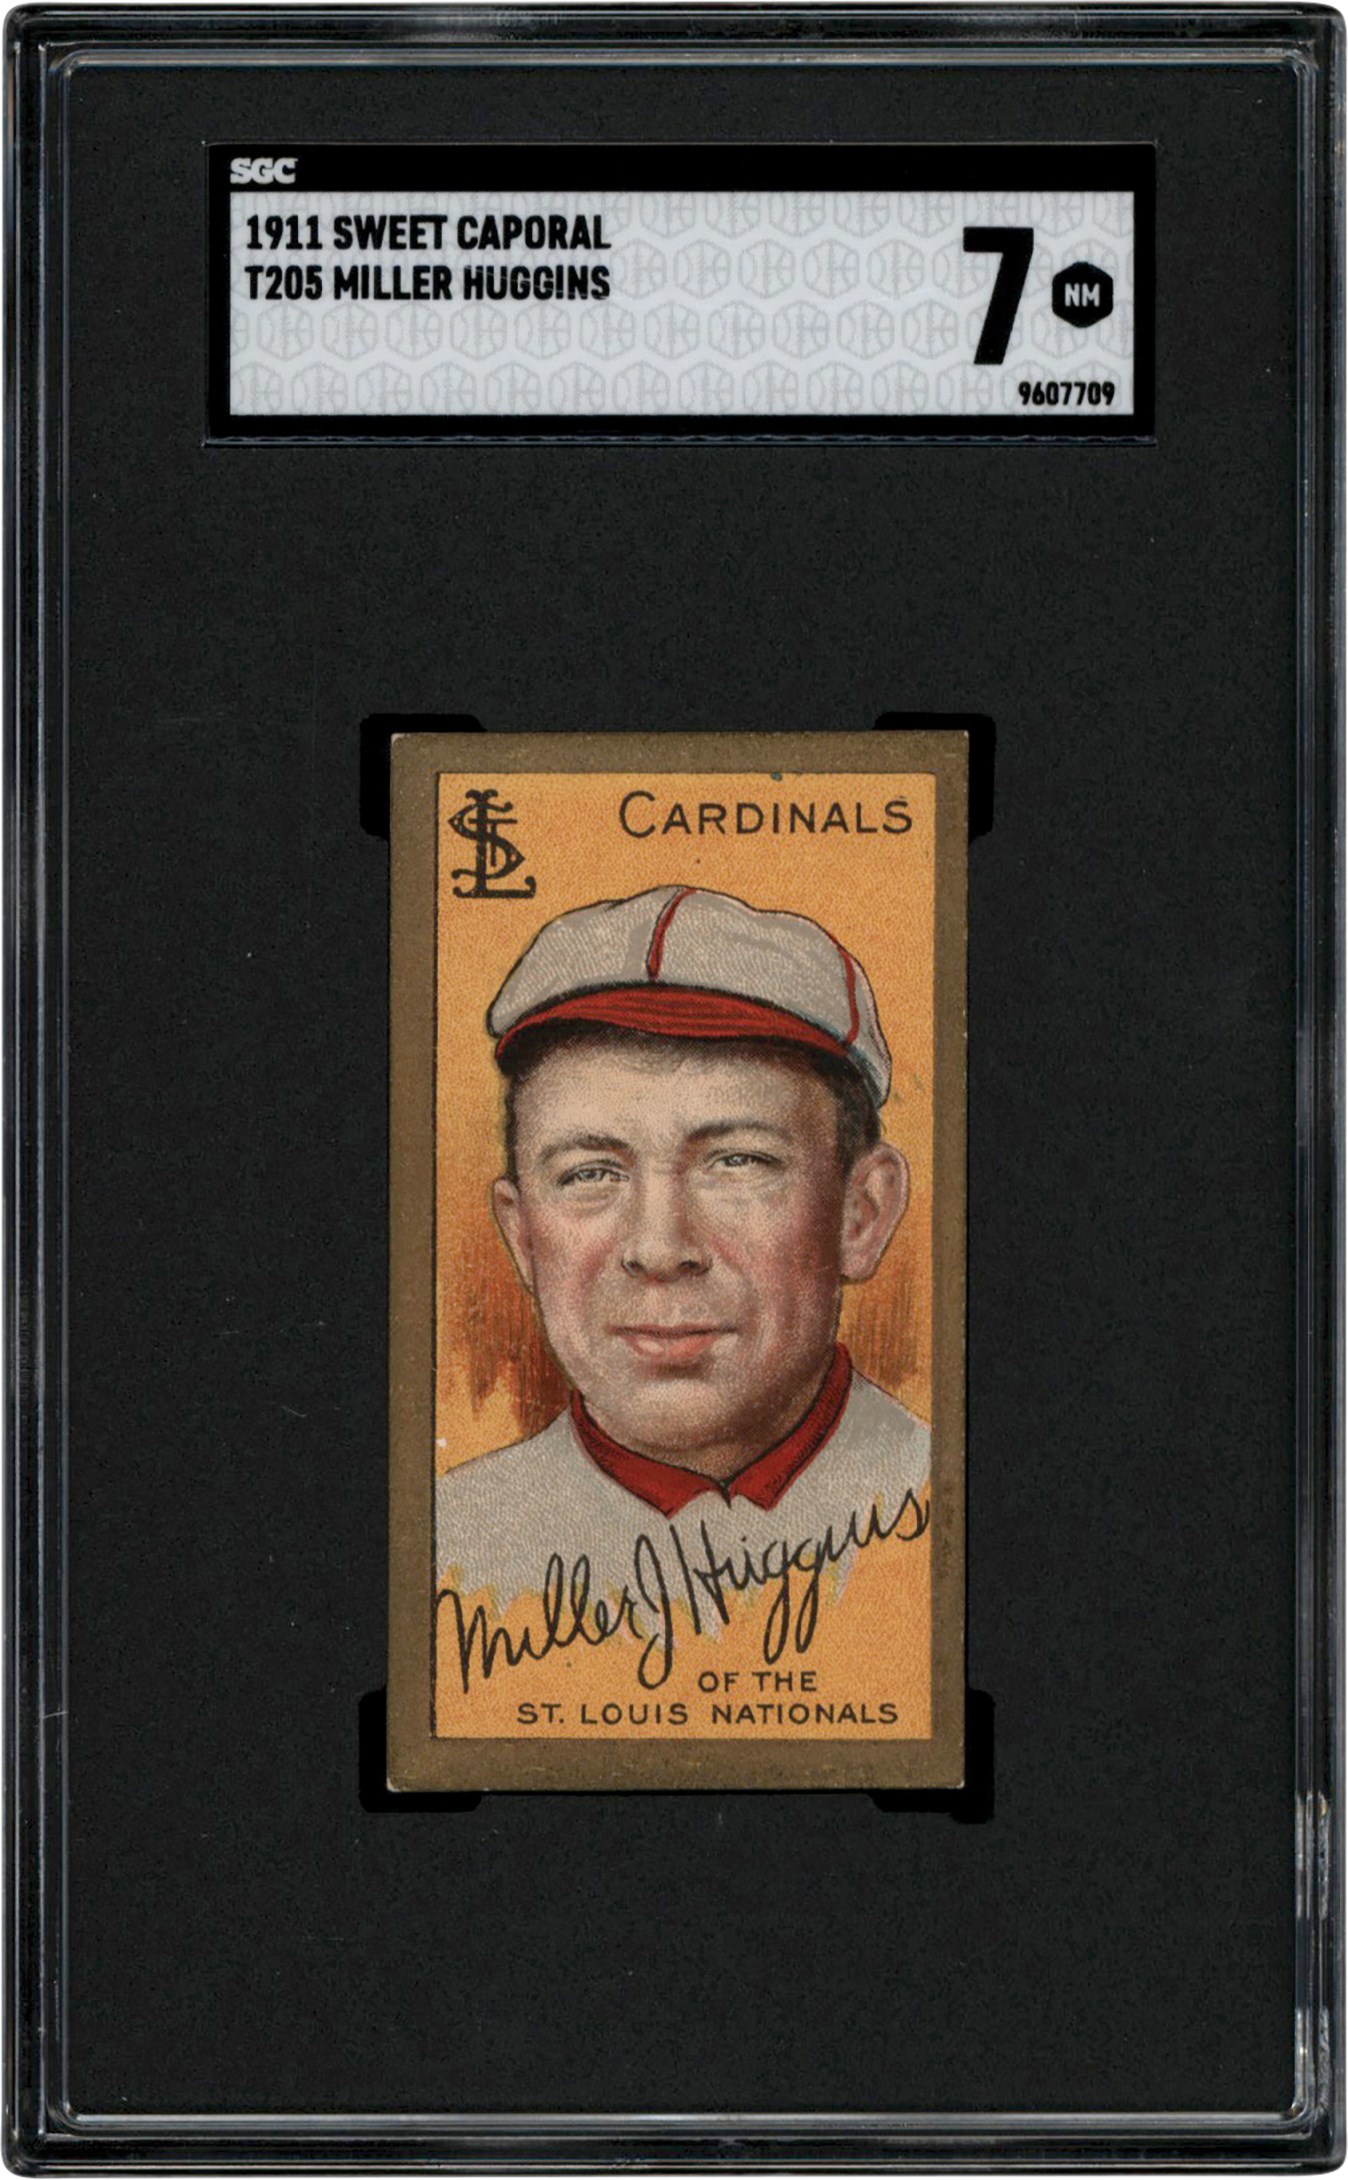 911 T205 Miller Huggins Sweet Caporal SGC NM 7 (Only Two Higher)